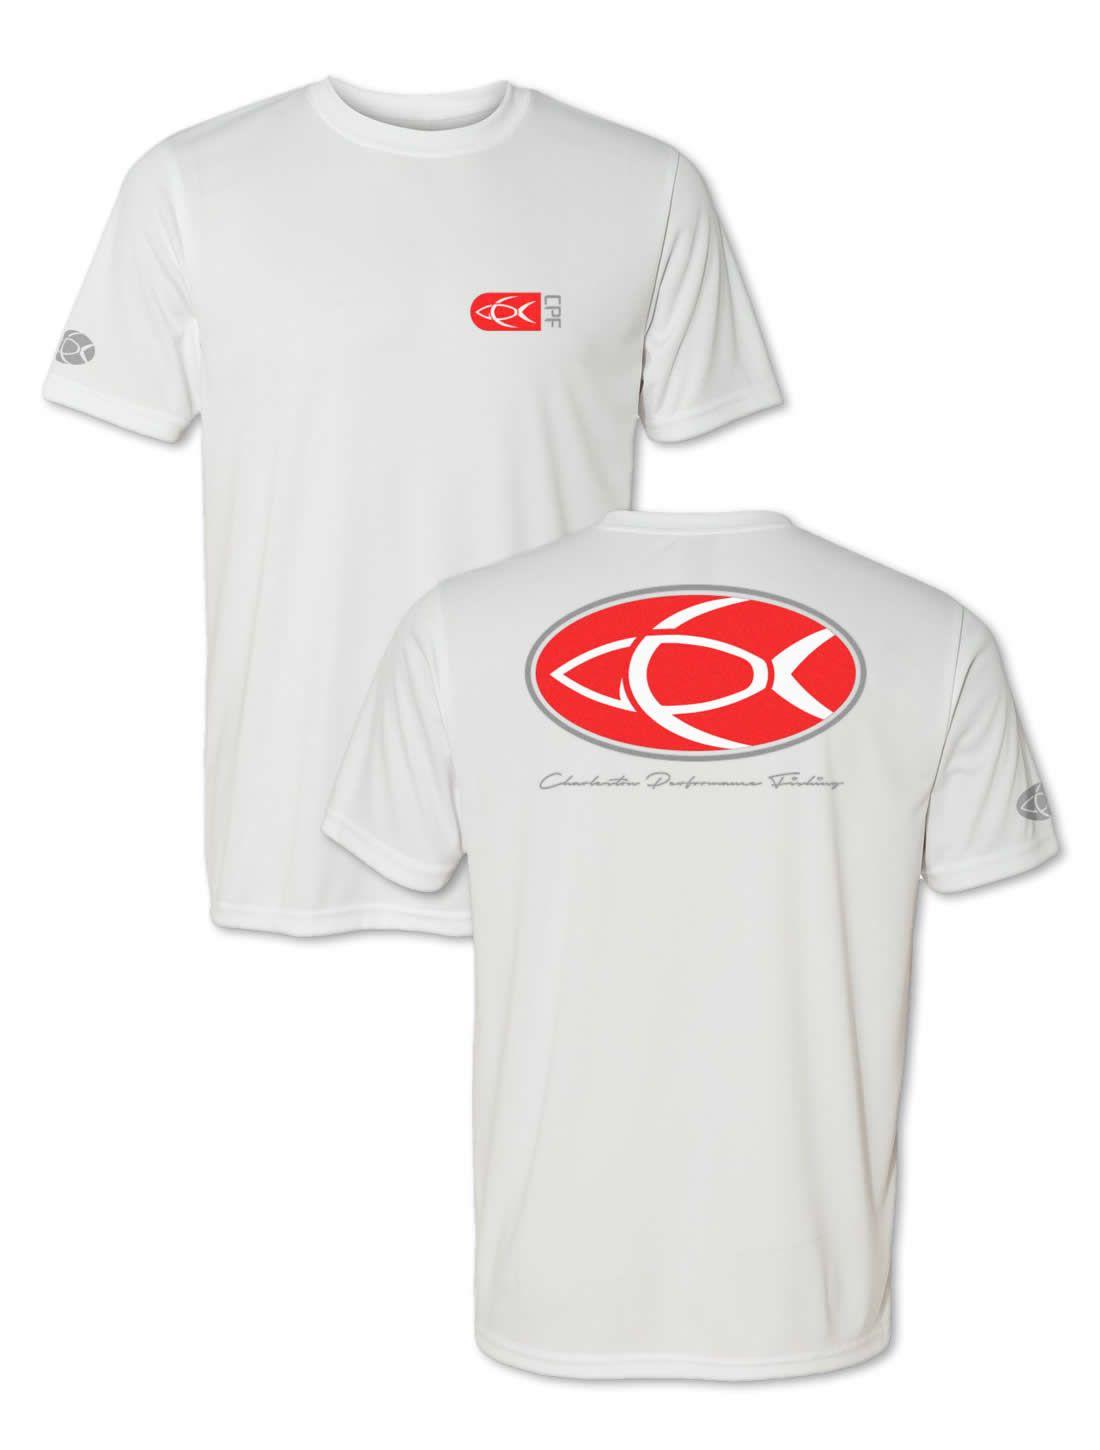 Red Oval with White a Logo - Oval Back Red Graphic White Short Sleeve Performance Fishing Shirt